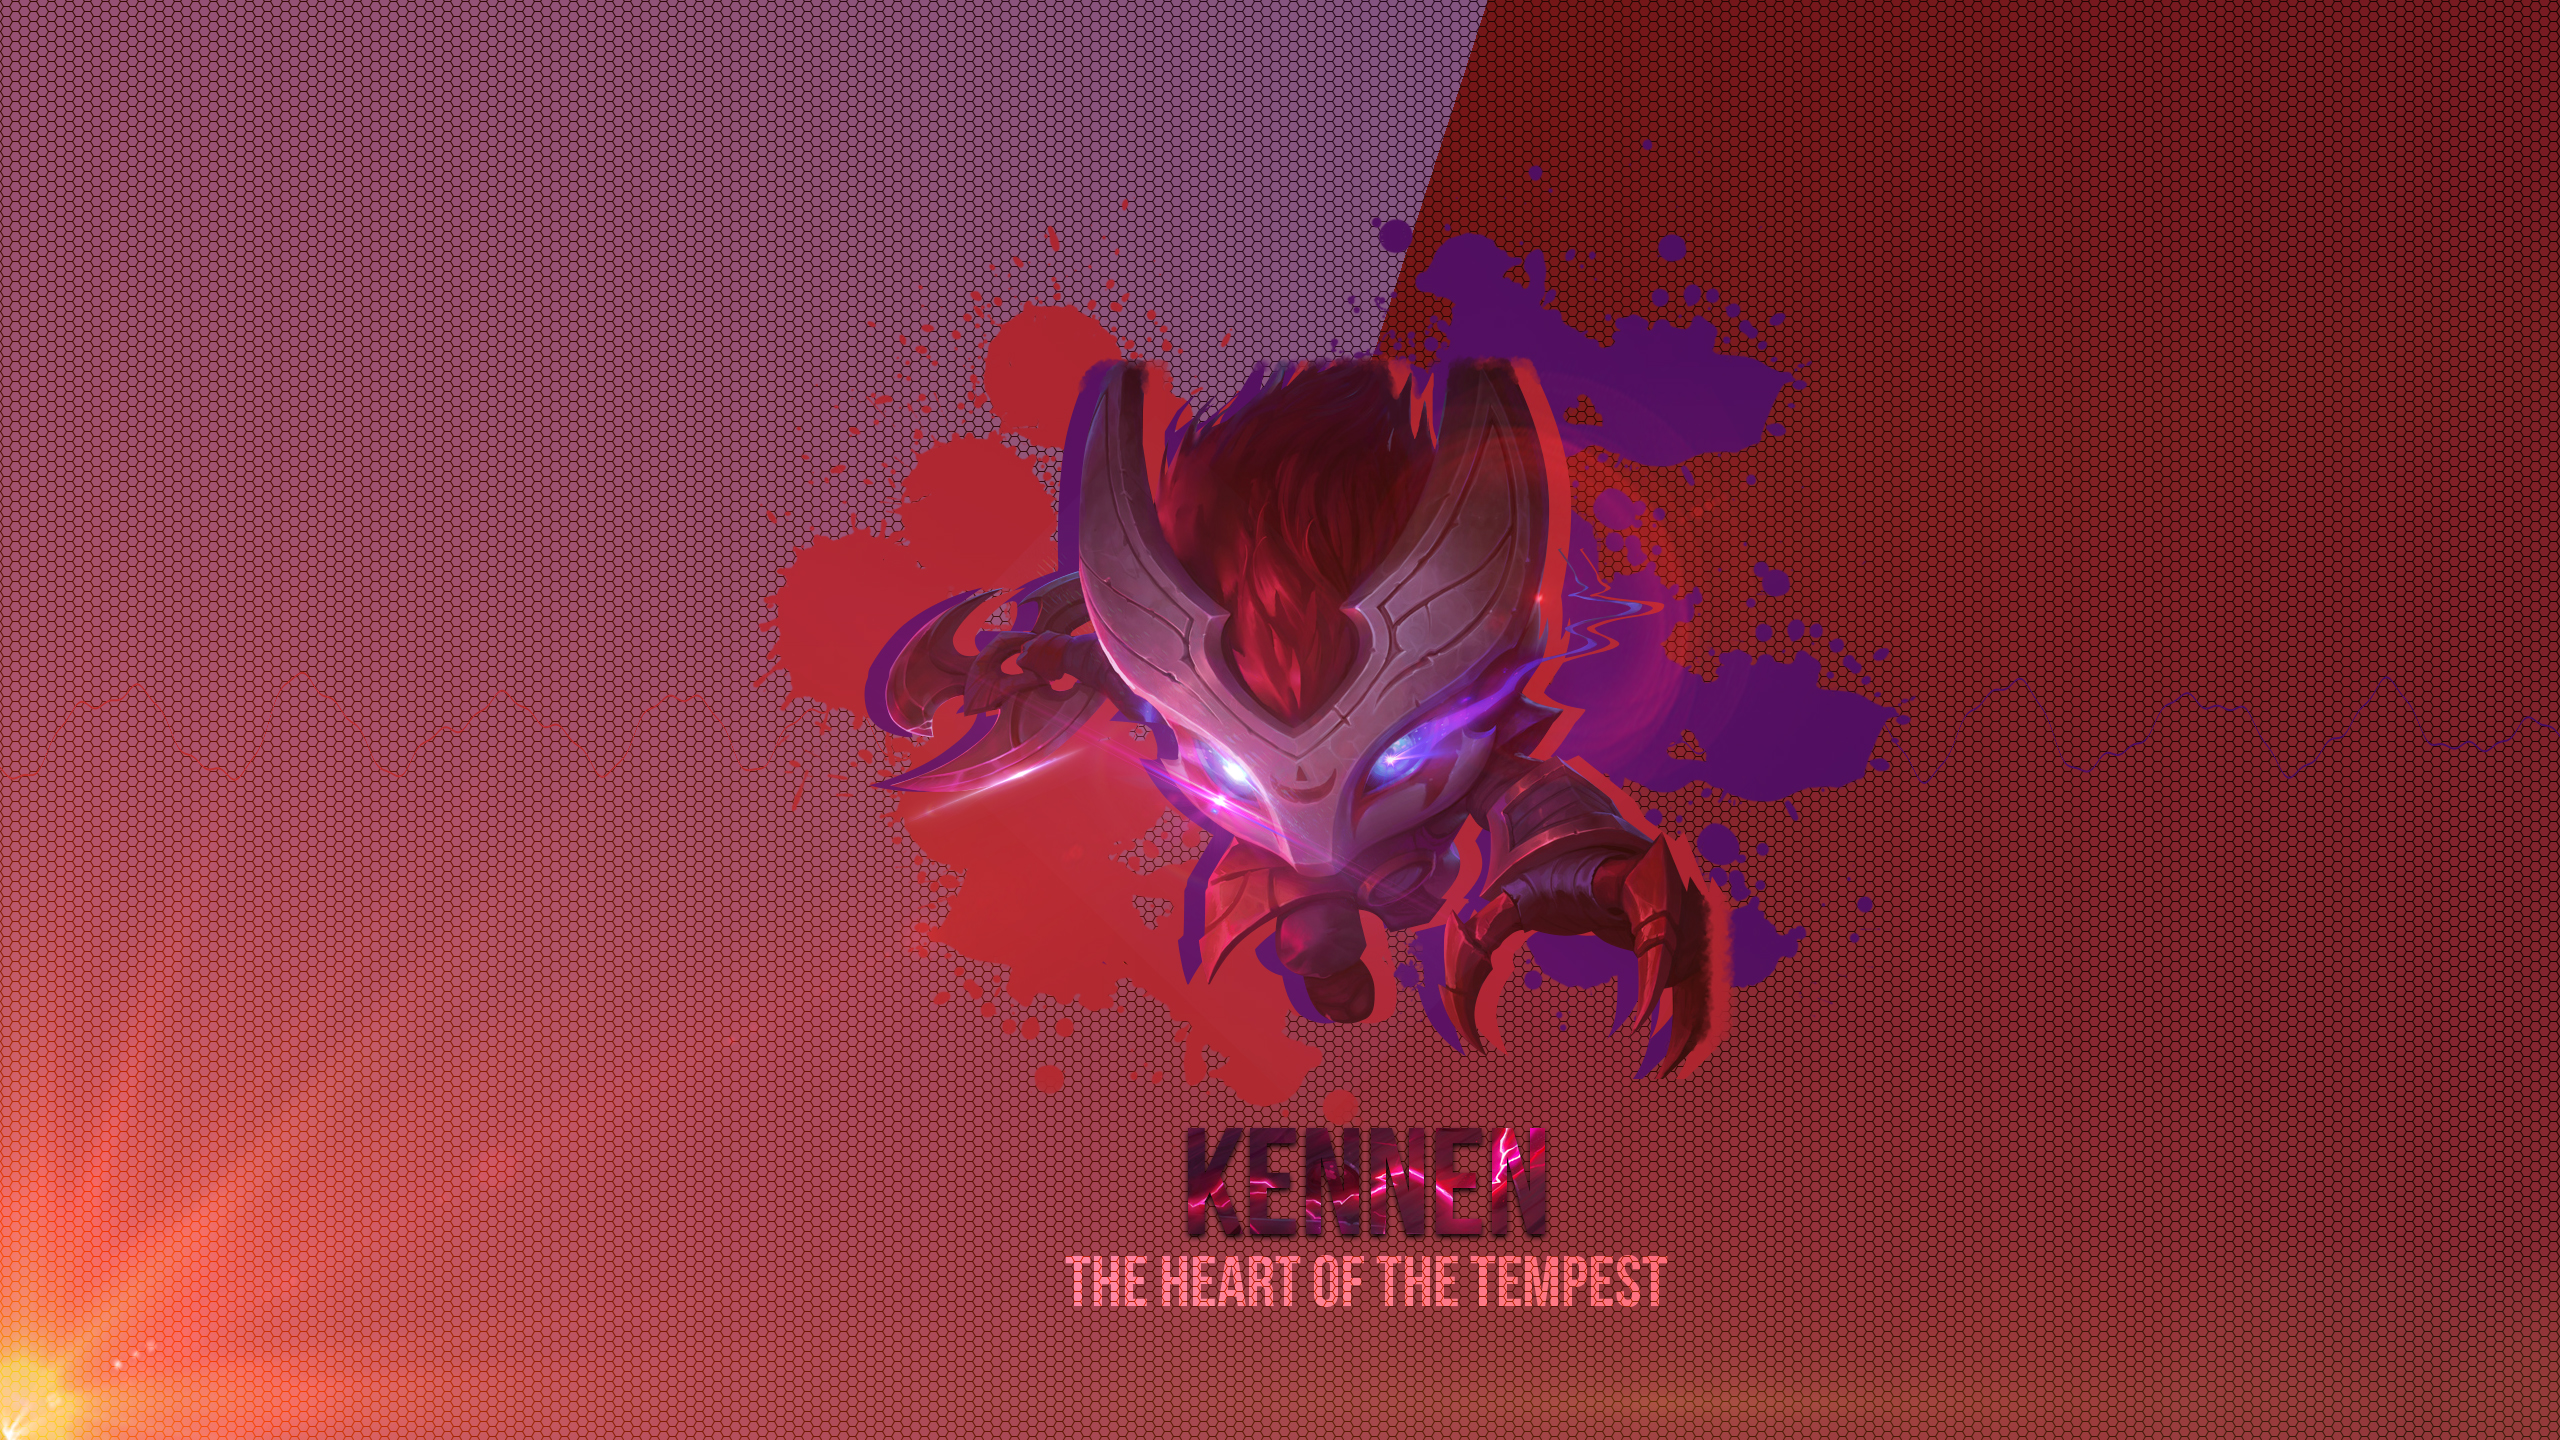 Bloodmoon Kennen Lolwallpapers Images, Photos, Reviews